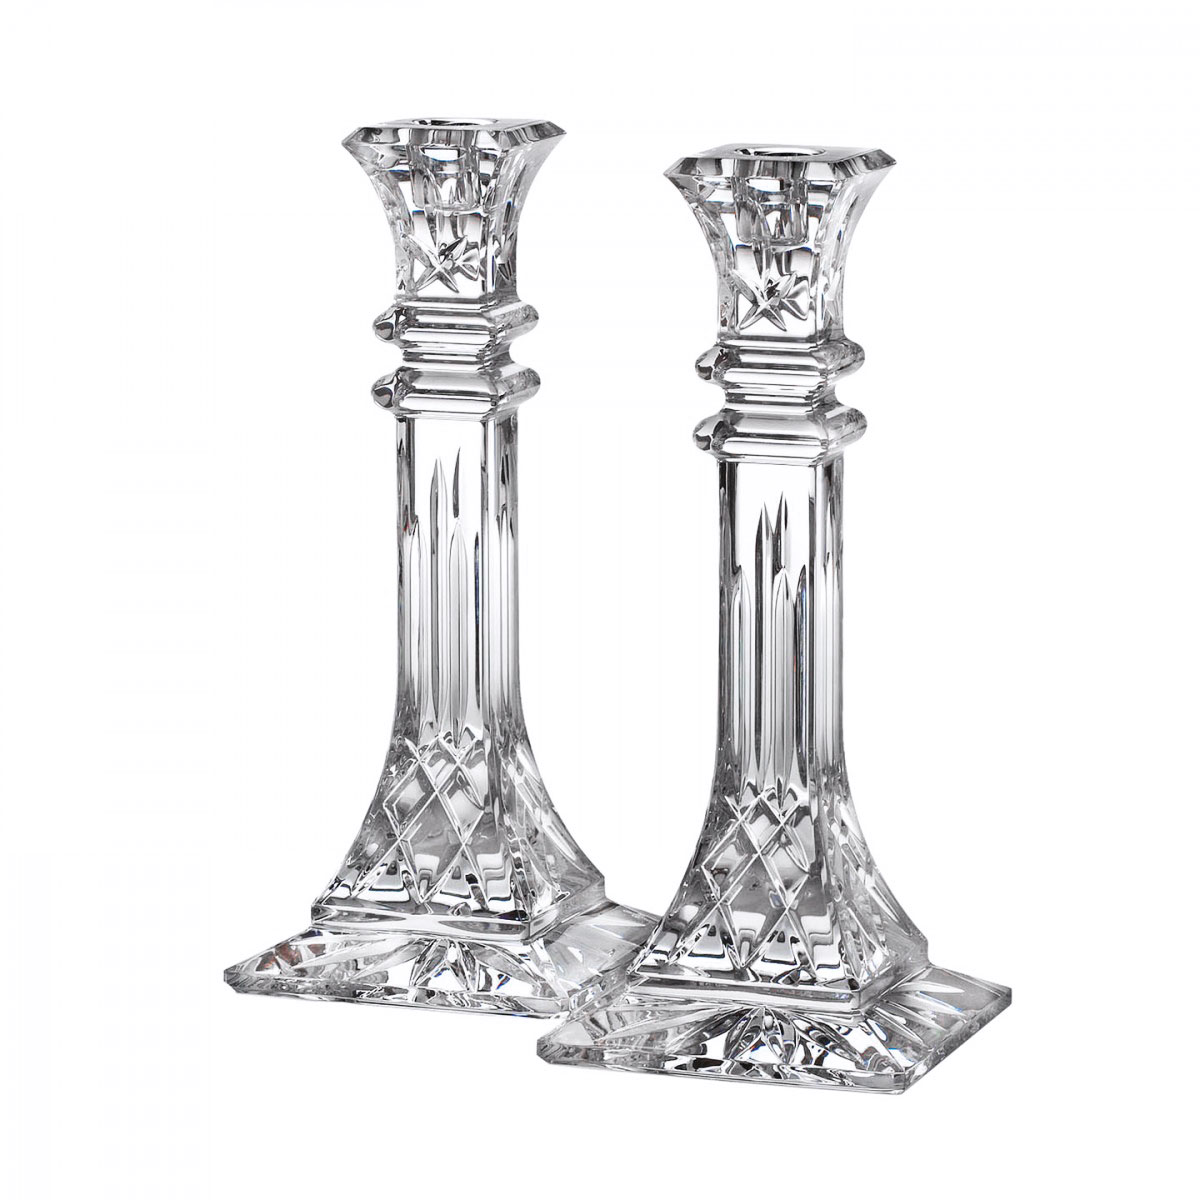 Waterford Crystal, Lismore 10" Candlestick, Pair